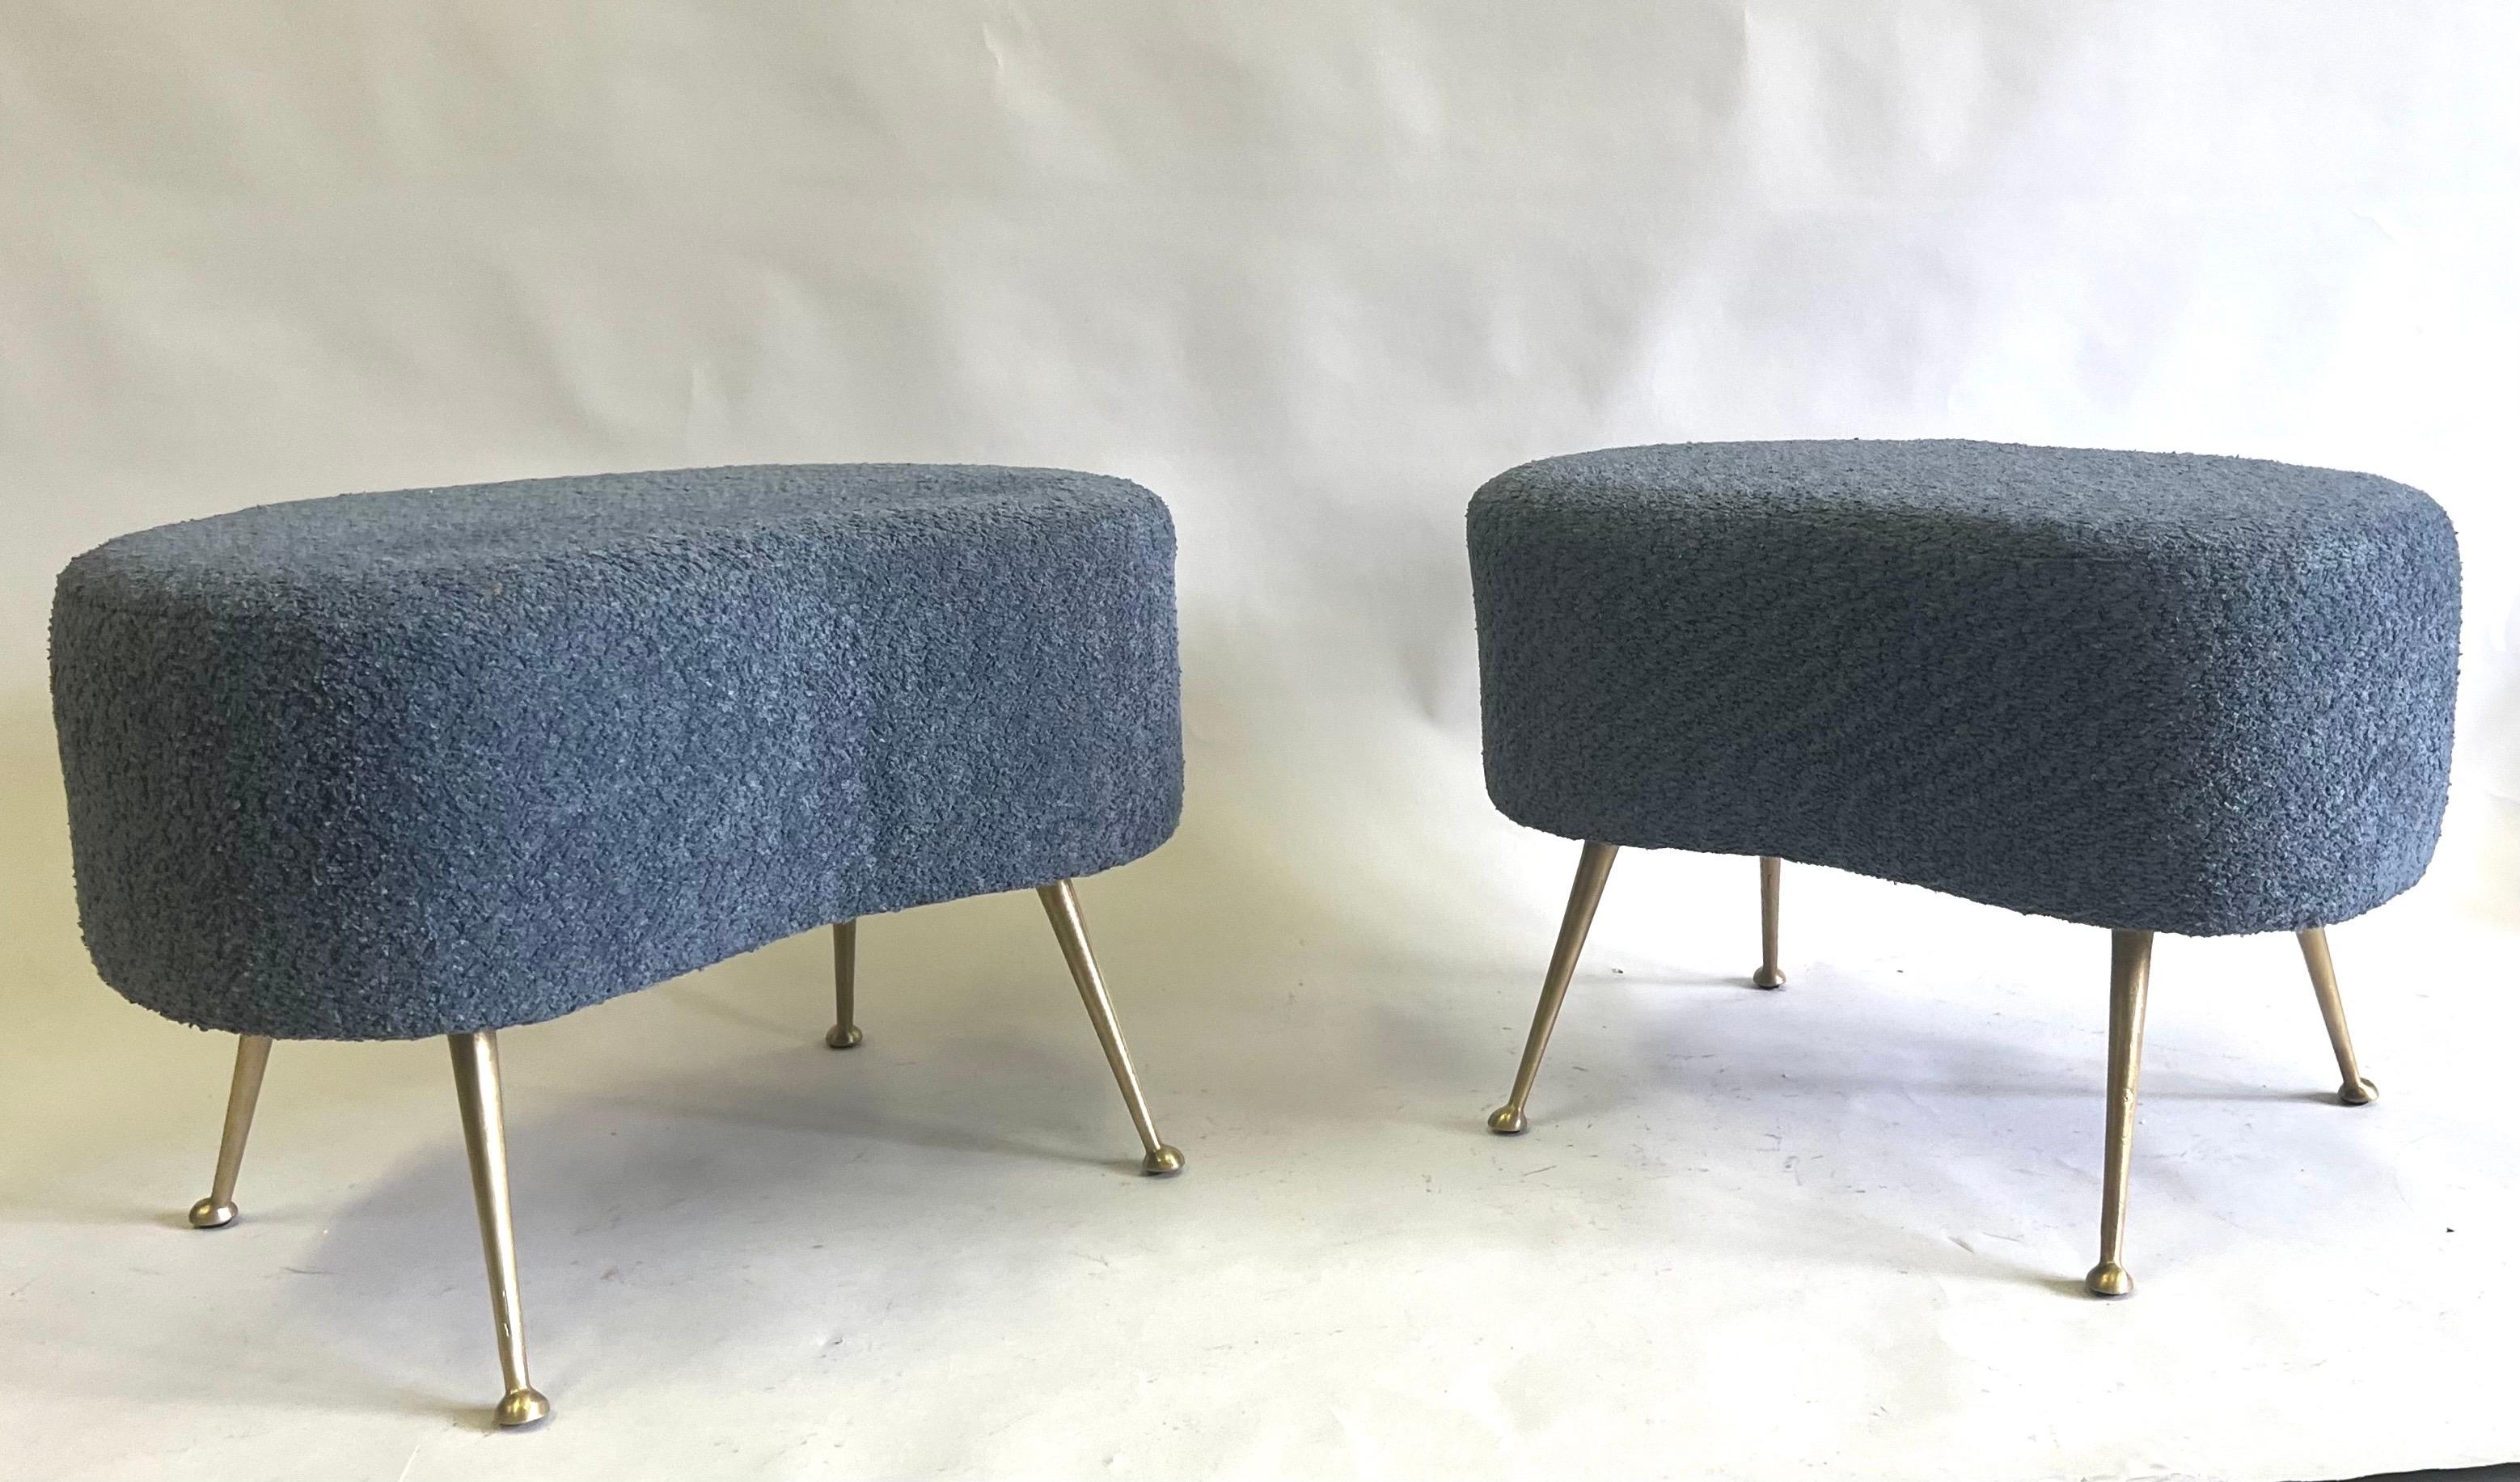 An Elegant Pair of Italian Midcentury Modern Organic Form Stools / Benches / Ottomans / Poofs in the style of Marco Zanuso circa 1953. The pieces feature a delicate organic curved form and rest on 4 splayed solid brass legs. They are covered in a